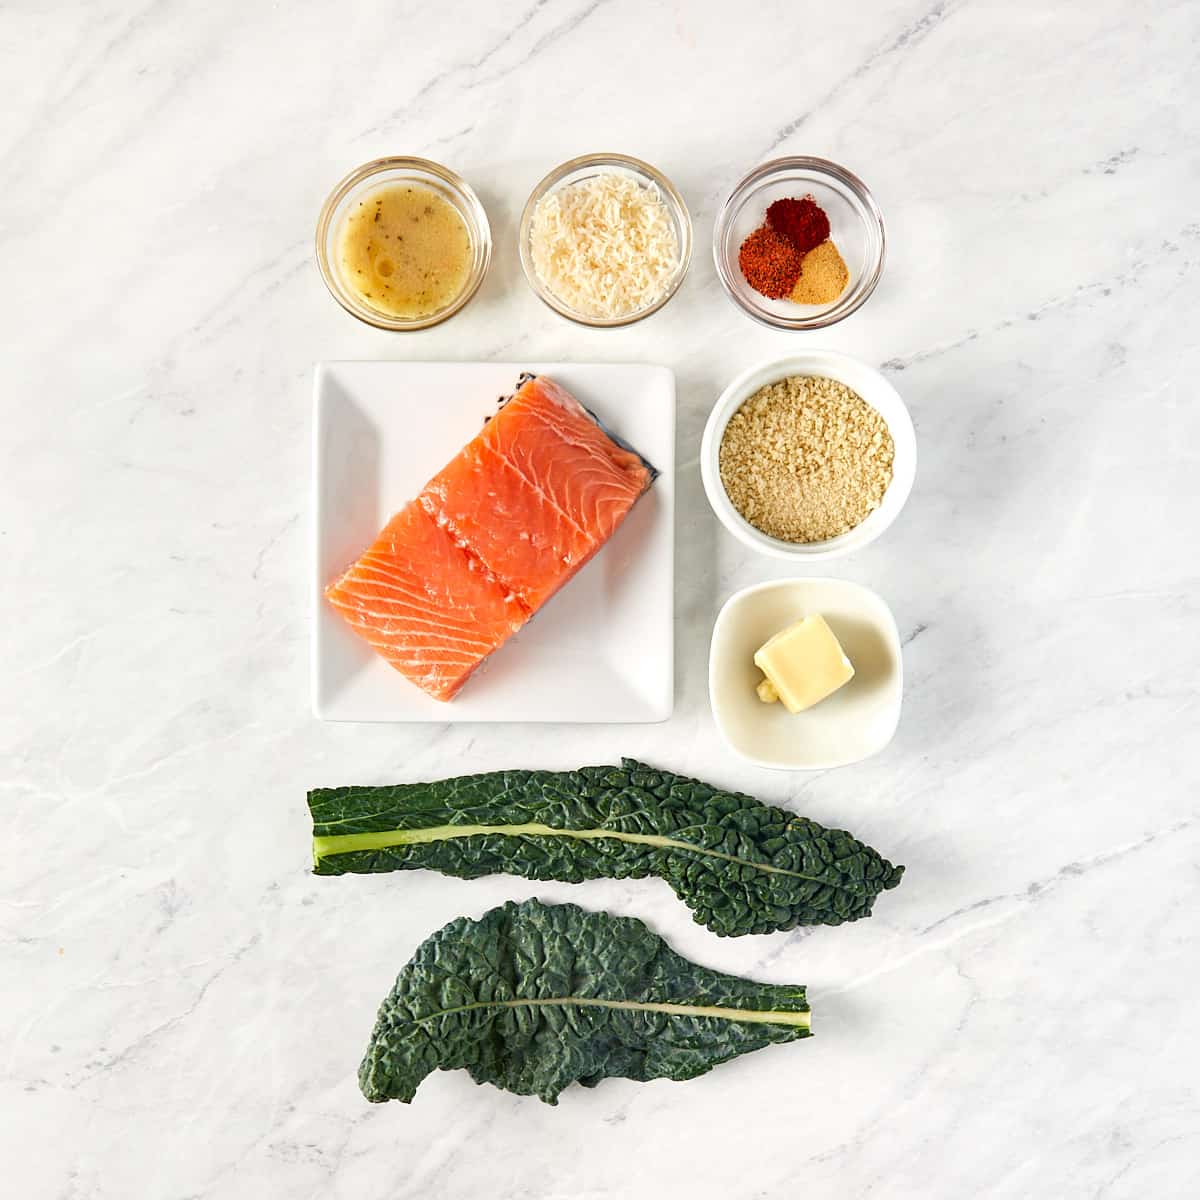 ingredients for kale caesar salad with salmon